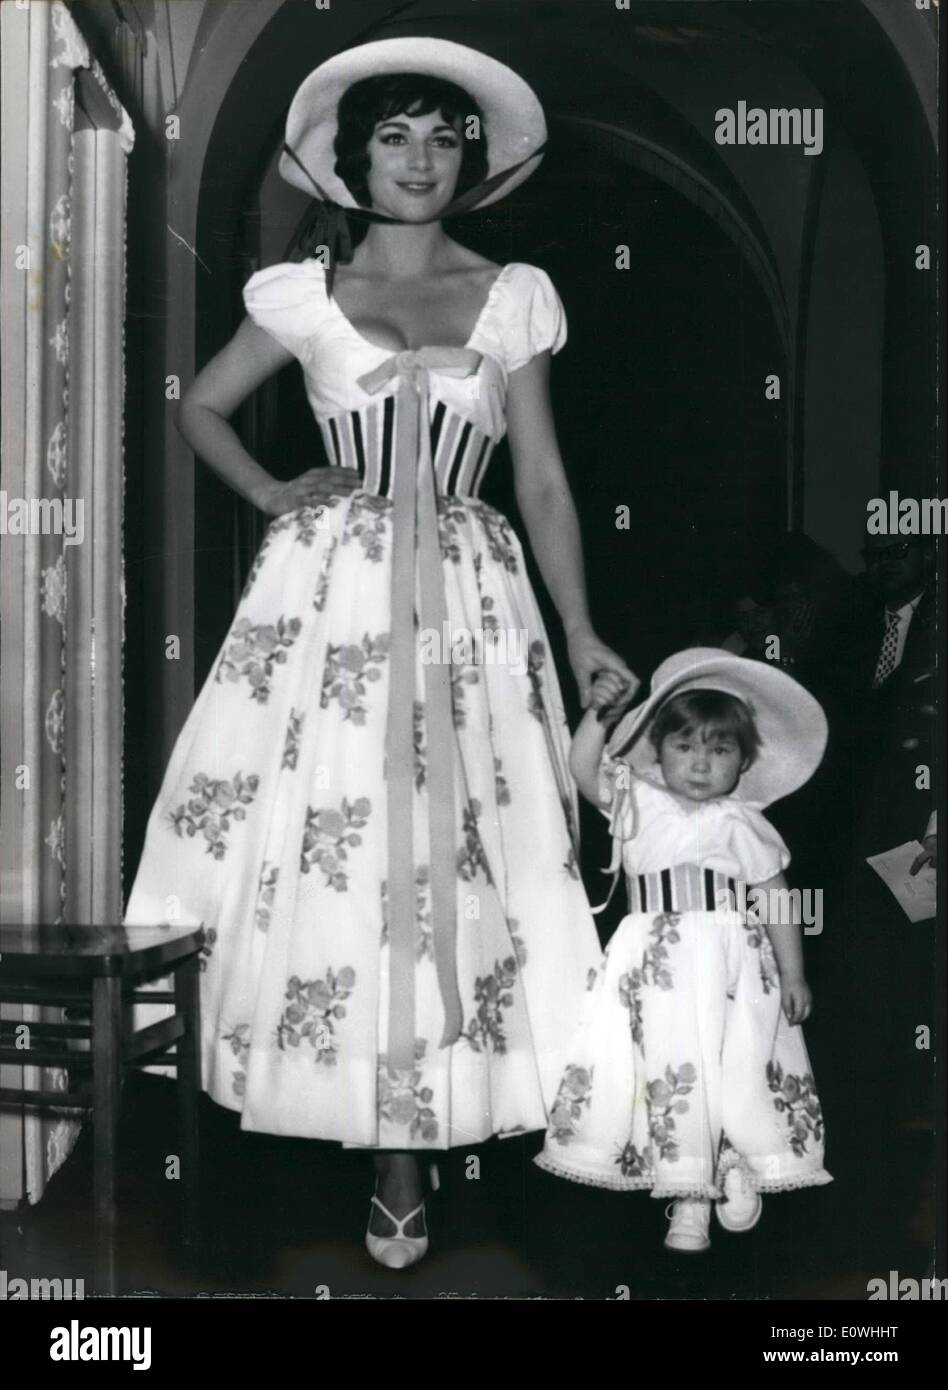 Feb. 02, 1963 - His homely love for costumes of the young fashion creator Werner Wunderlich (Munich) could be seen also during his spring and summer dress parade some days ago. A lot of approval was spent, when Pat and little Alexandra (mother and daughter) came with the same beautiful cambric evening dress. Everybody knew, that the model for this dress could only have been Bavarian costume. Stock Photo